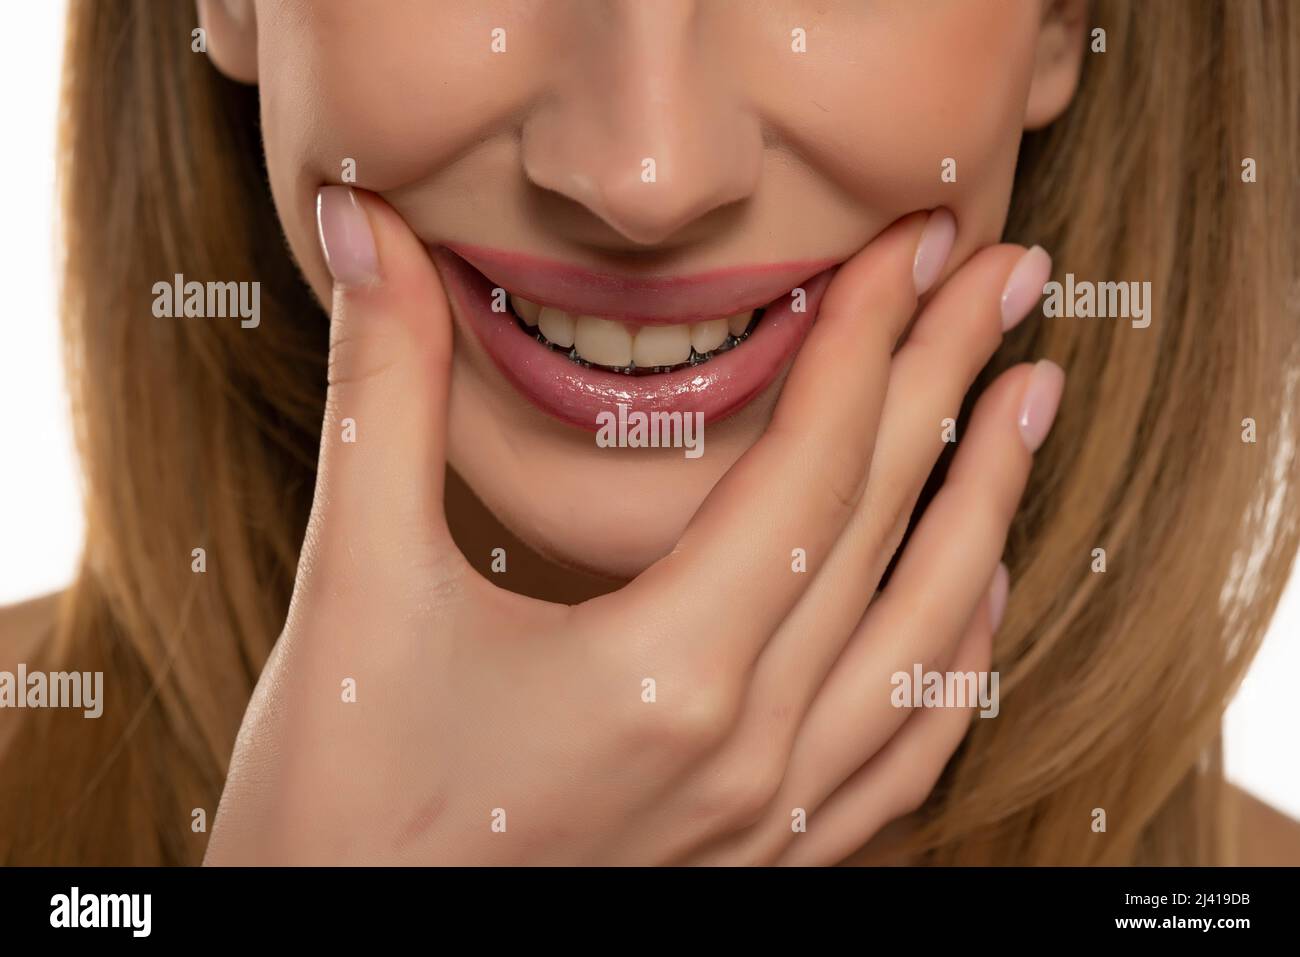 cropped portrait of young woman stretching mouth in fake smile with her fingers Stock Photo